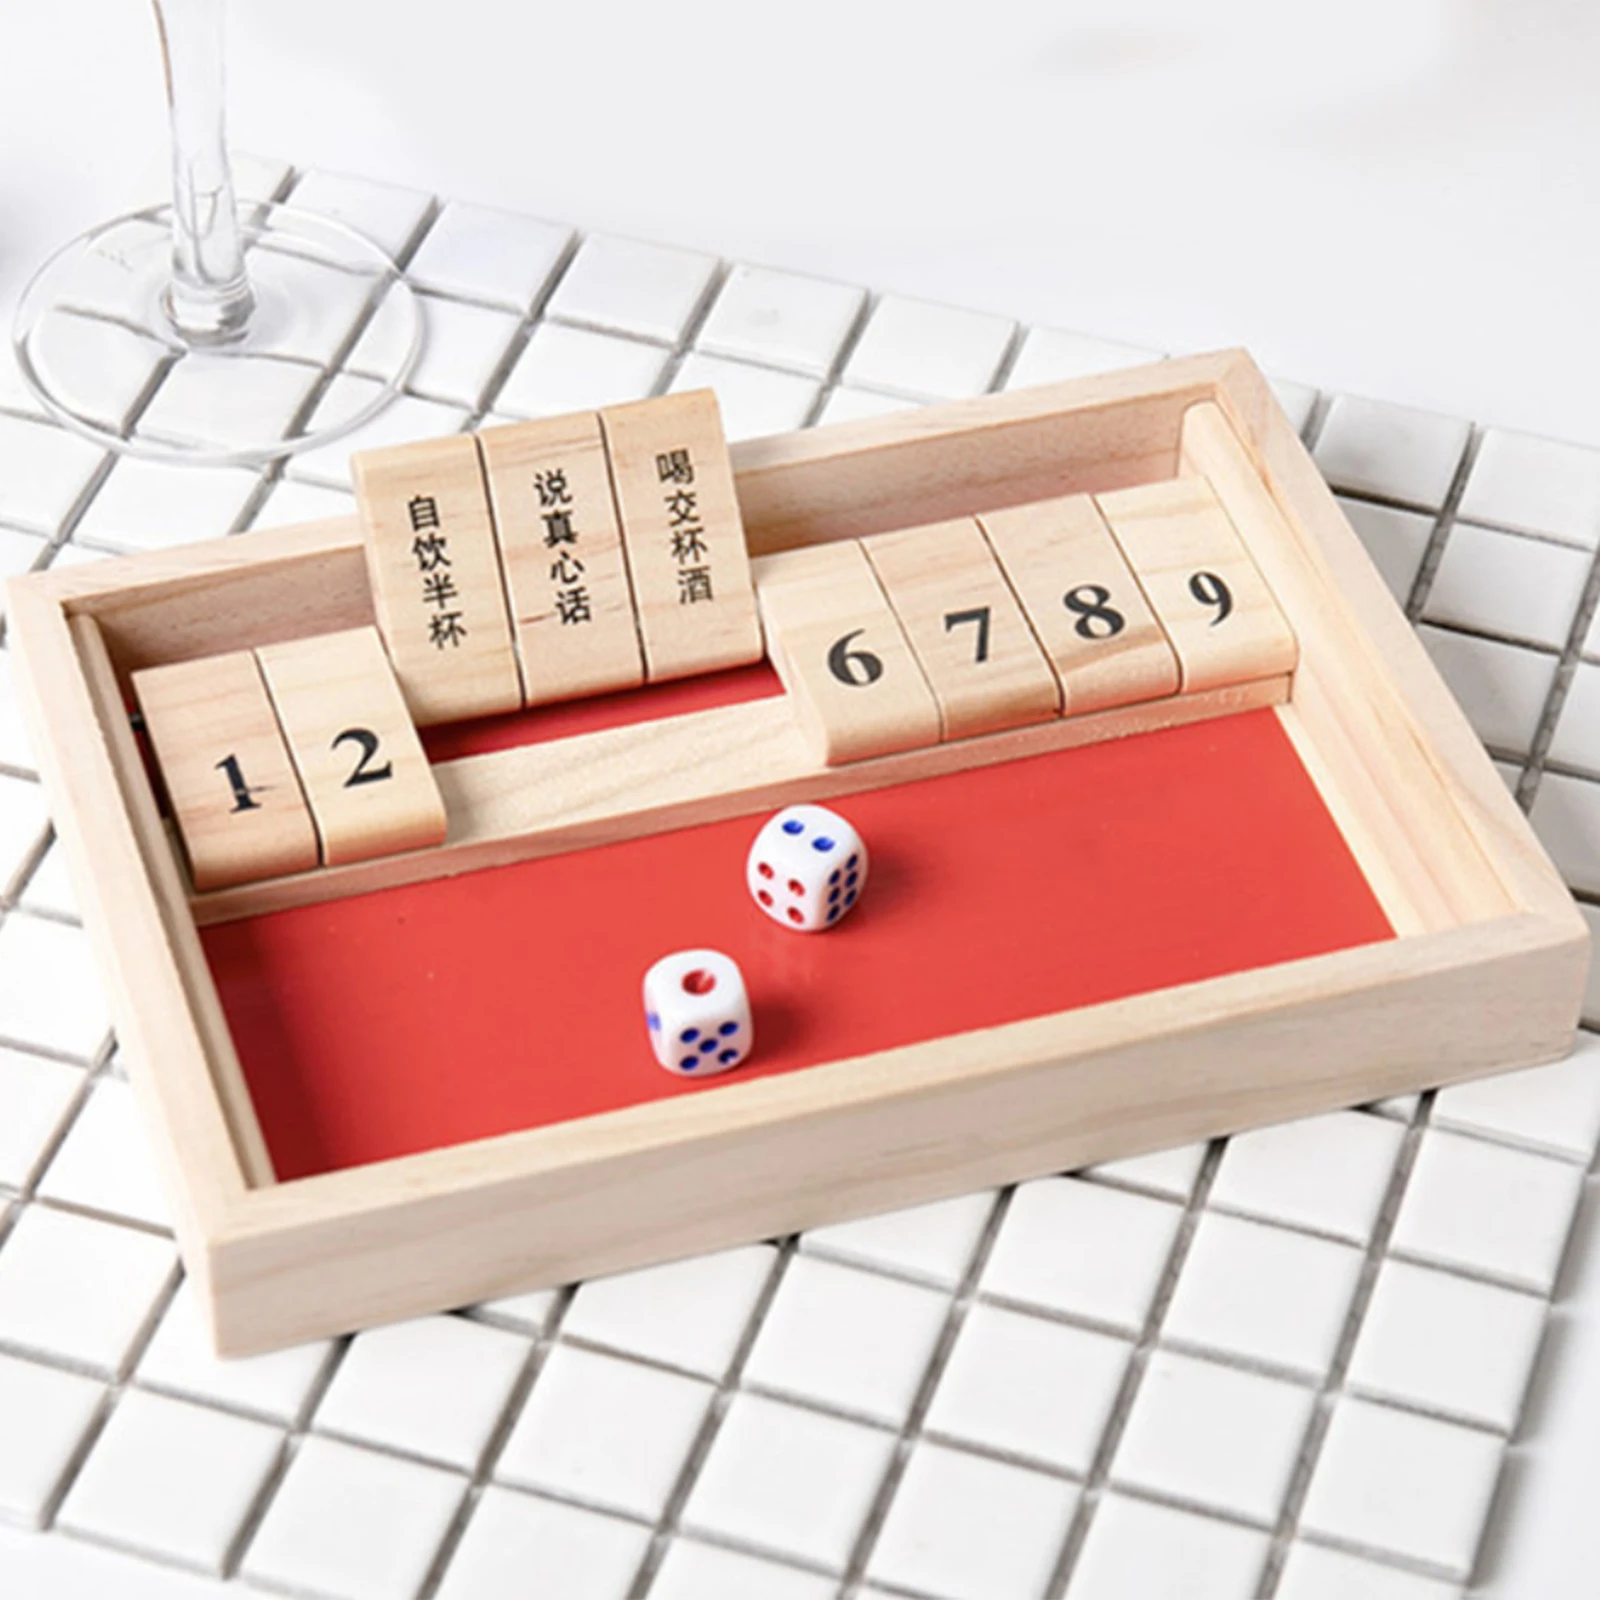 Traditional Four Sided Wooden 9 Number & 2 Dice Set Pub Bar Board Dice Game For Shut the Box Family Travel Fun Game